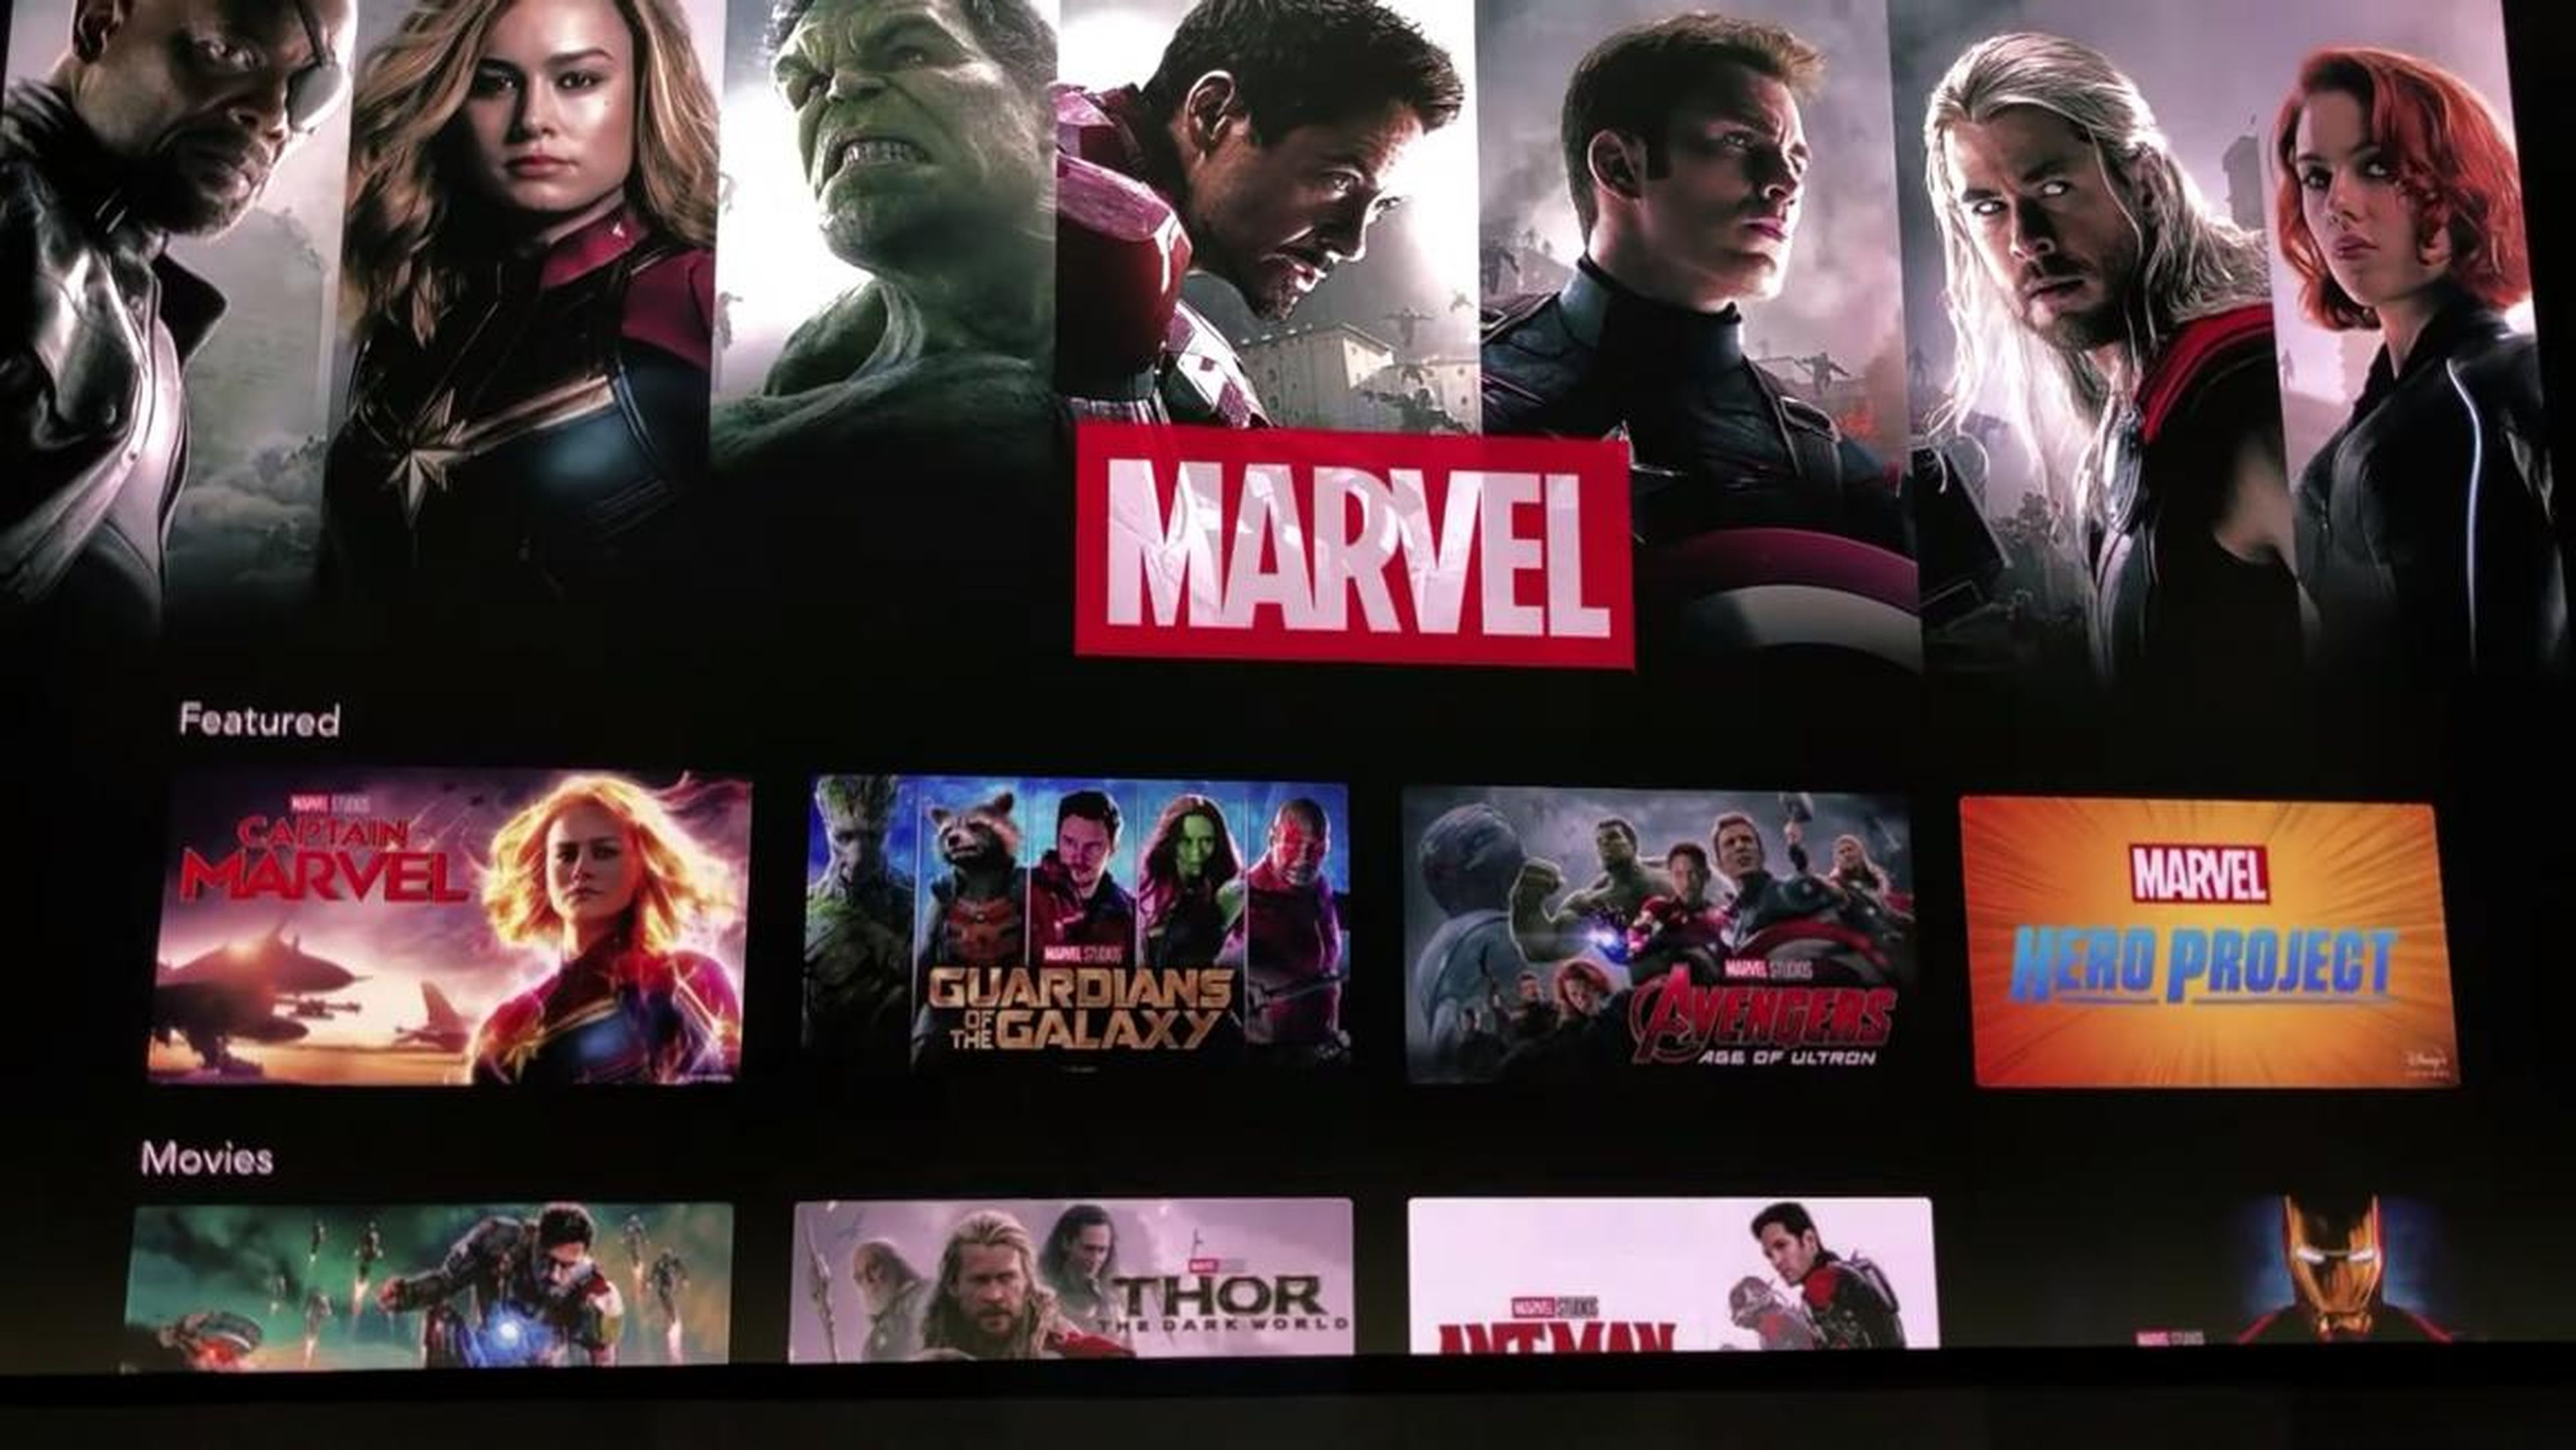 We still don't know which Marvel movies will be included at launch, but it won't include all 23 titles from the Marvel Cinematic Universe. Still, most movies, and all of the original shows, are expected to be there.